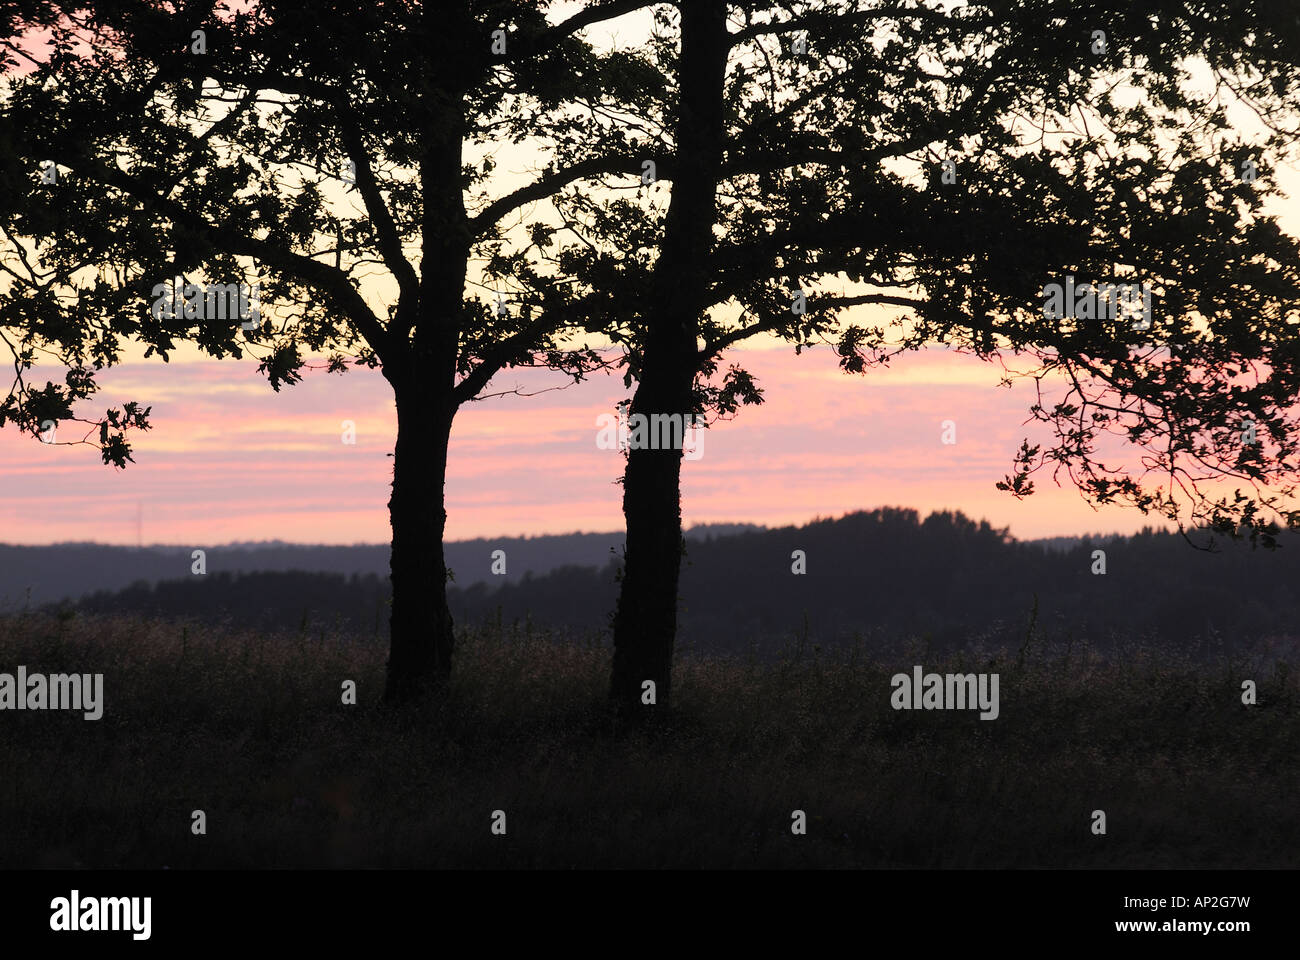 Scenic view of trees at sunset in Sweden Stock Photo